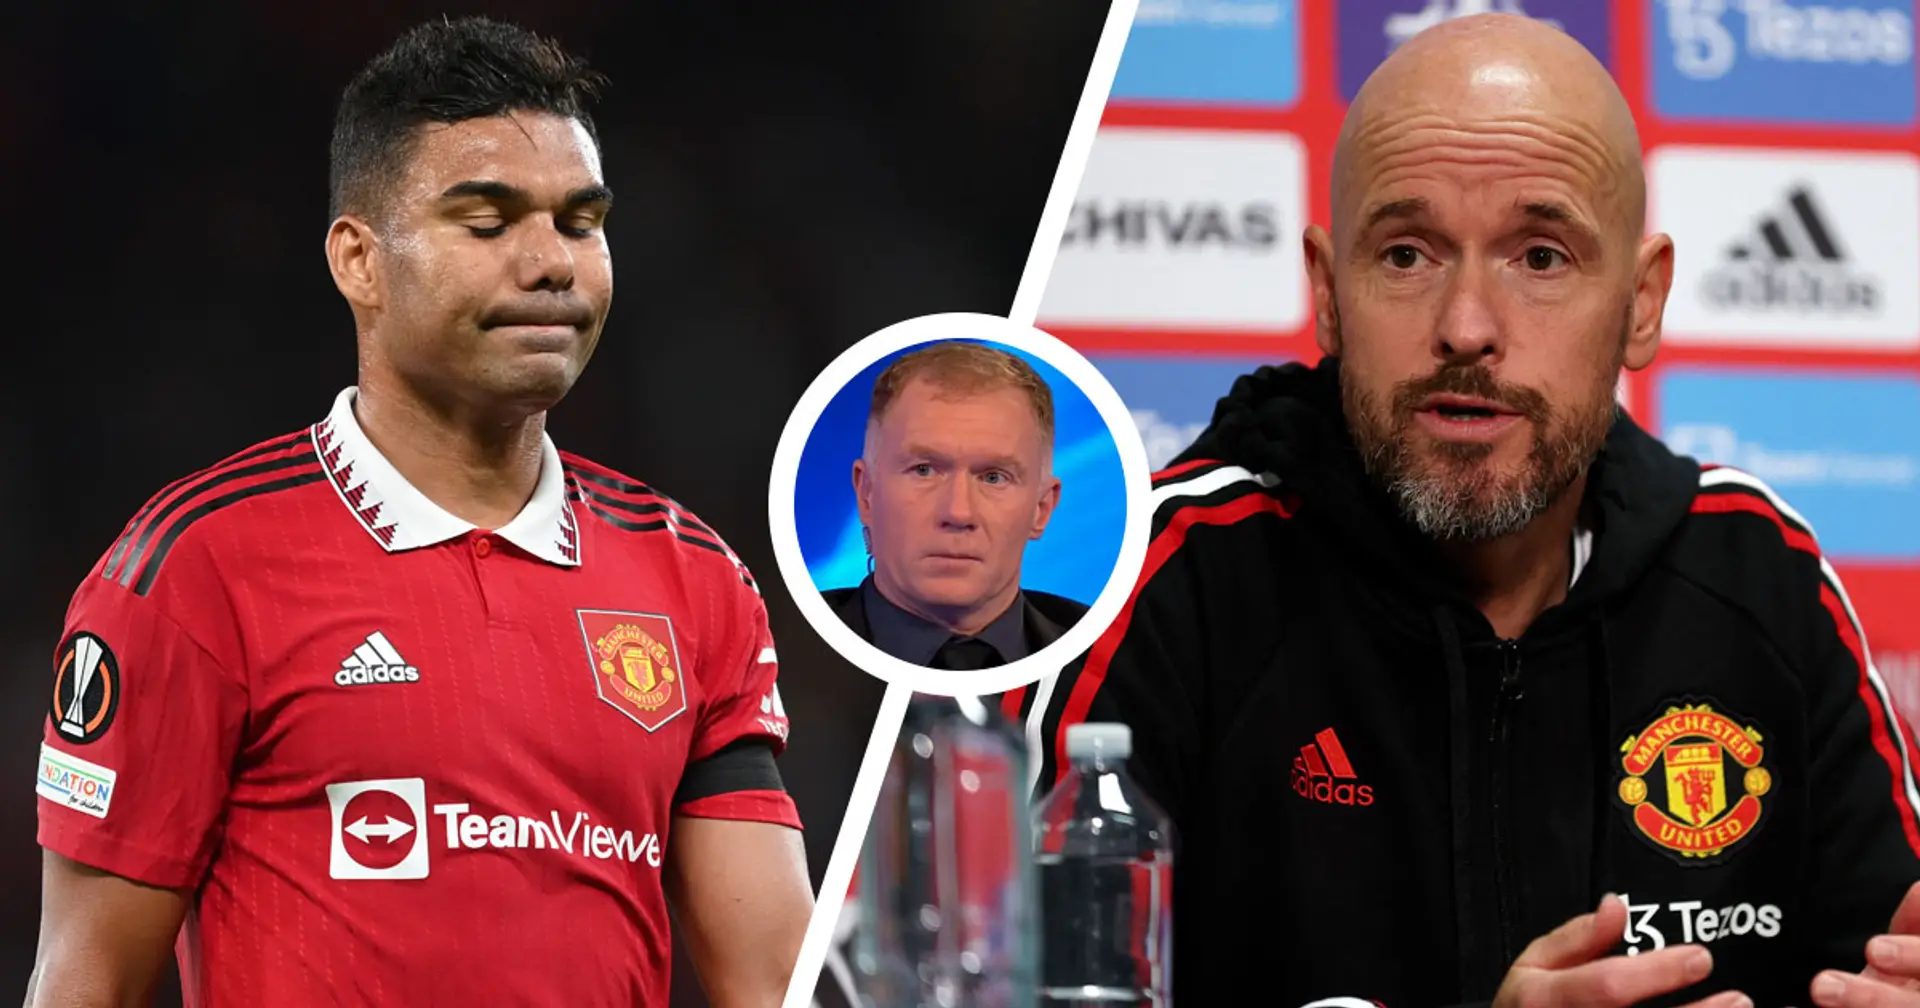 'I wonder if it was the manager's signing': Scholes explains why Ten Hag could get blamed if Casemiro & 2 more United transfers don't work out